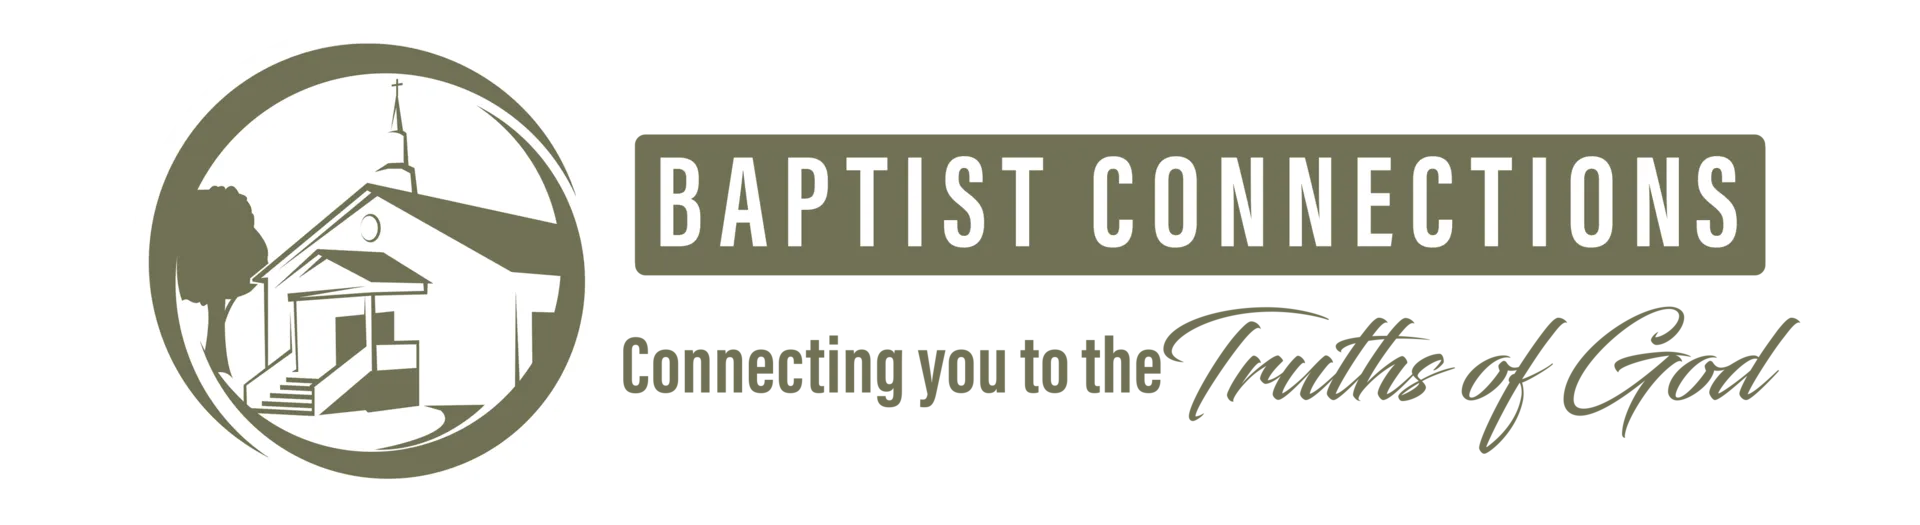 Baptist Connections